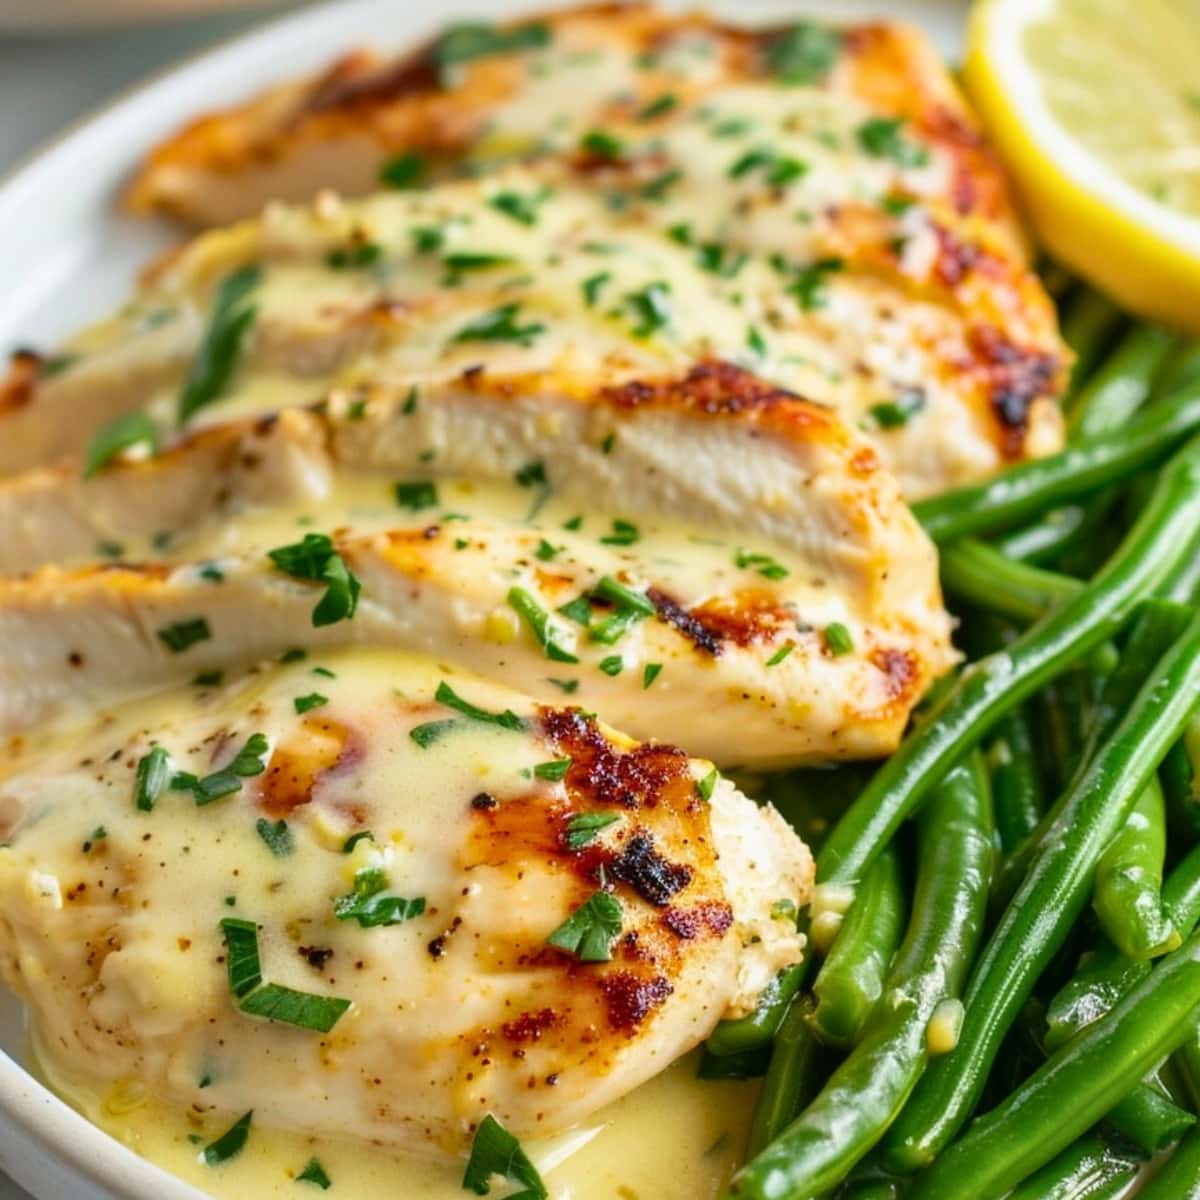 Lemon garlic chicken served with green beans and lemon, garnished with chopped herbs.